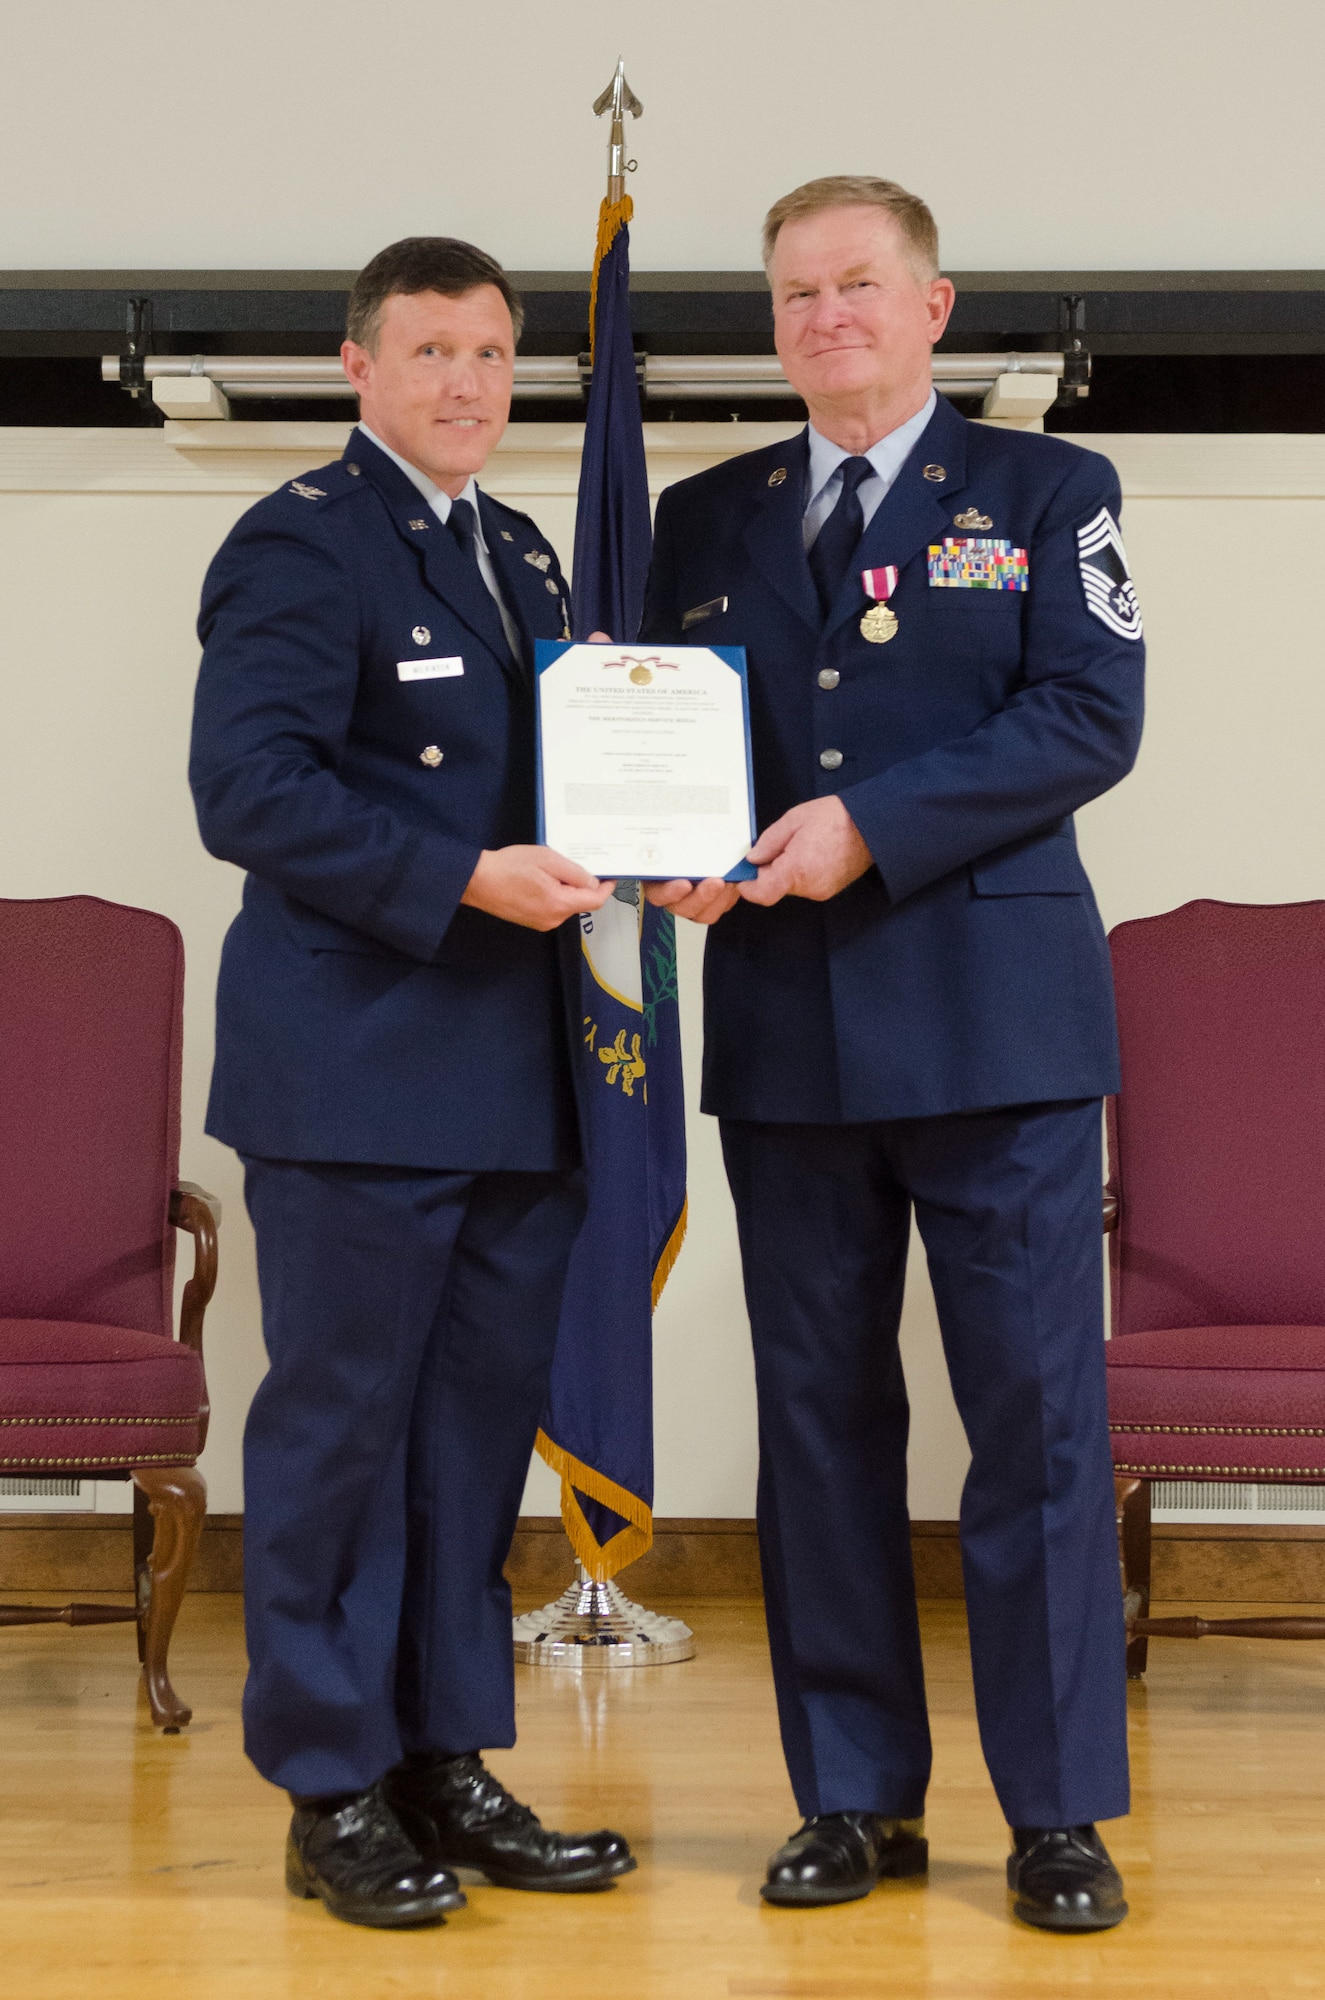 Col. Jeffrey Wilkinson (left), commander of the Kentucky Air National Guard’s 123rd Airlift Wing, presents a Meritorious Service Medal to Chief Master Sgt. David Selby during Selby’s retirement ceremony at the Kentucky Air National Guard Base in Louisville, Ky., May 19, 2018. Selby, the 123rd Mission Support Group superintendent, served for 39 years in the Kentucky Air National Guard. (U.S. Air National Guard photo by Master Sgt. Vicky Spesard)